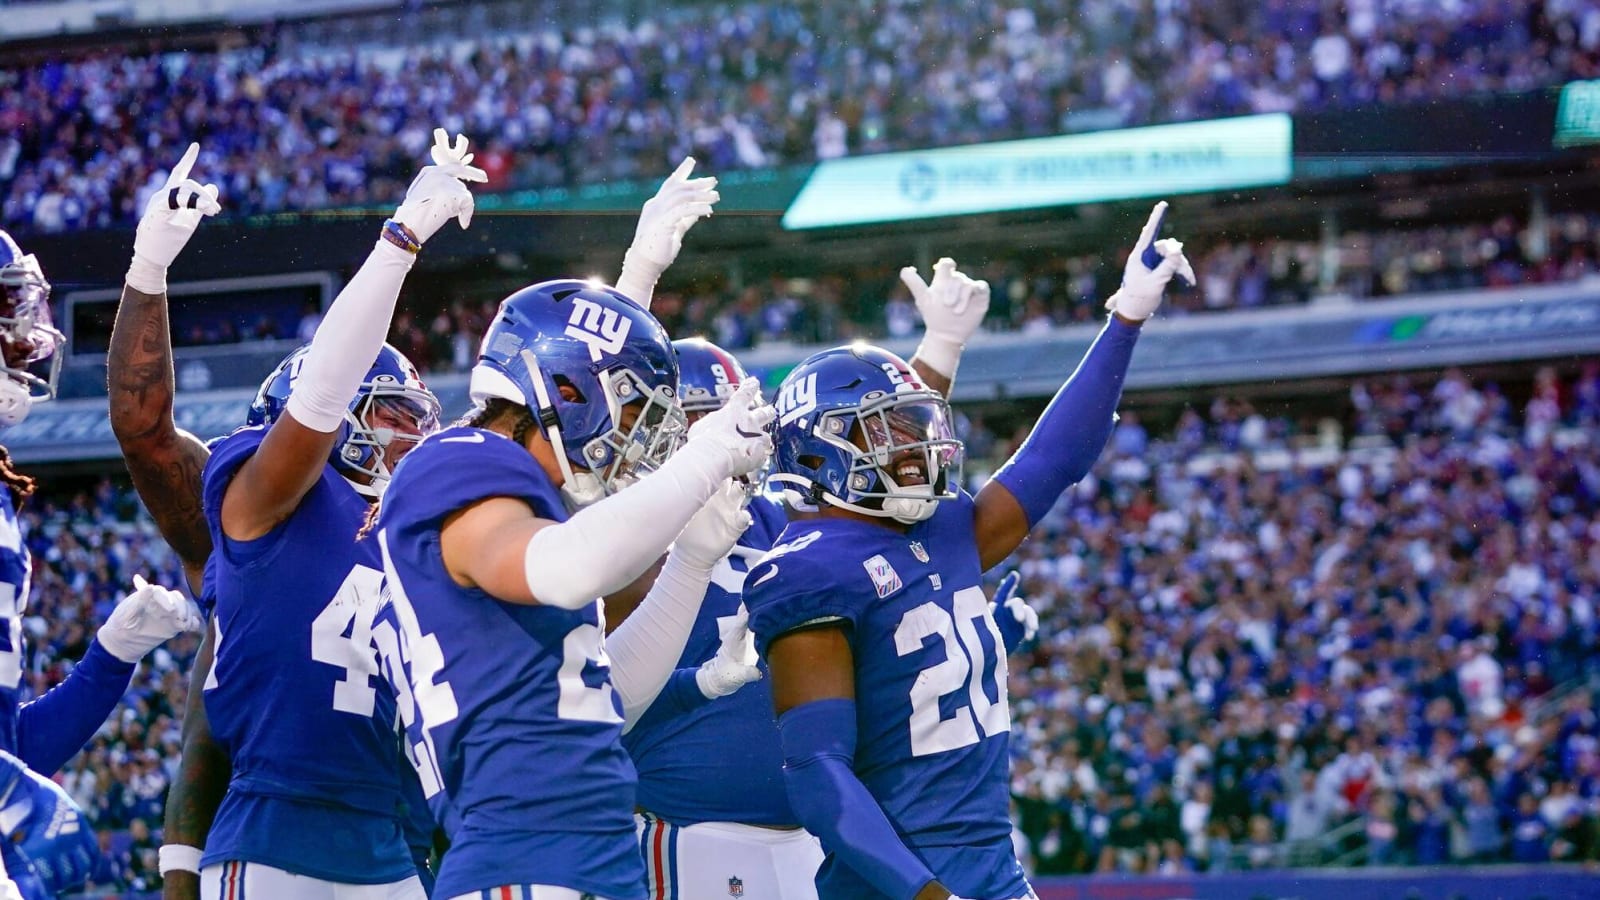 Giants grow reputation as late-game beasts in 24-20 win over Ravens